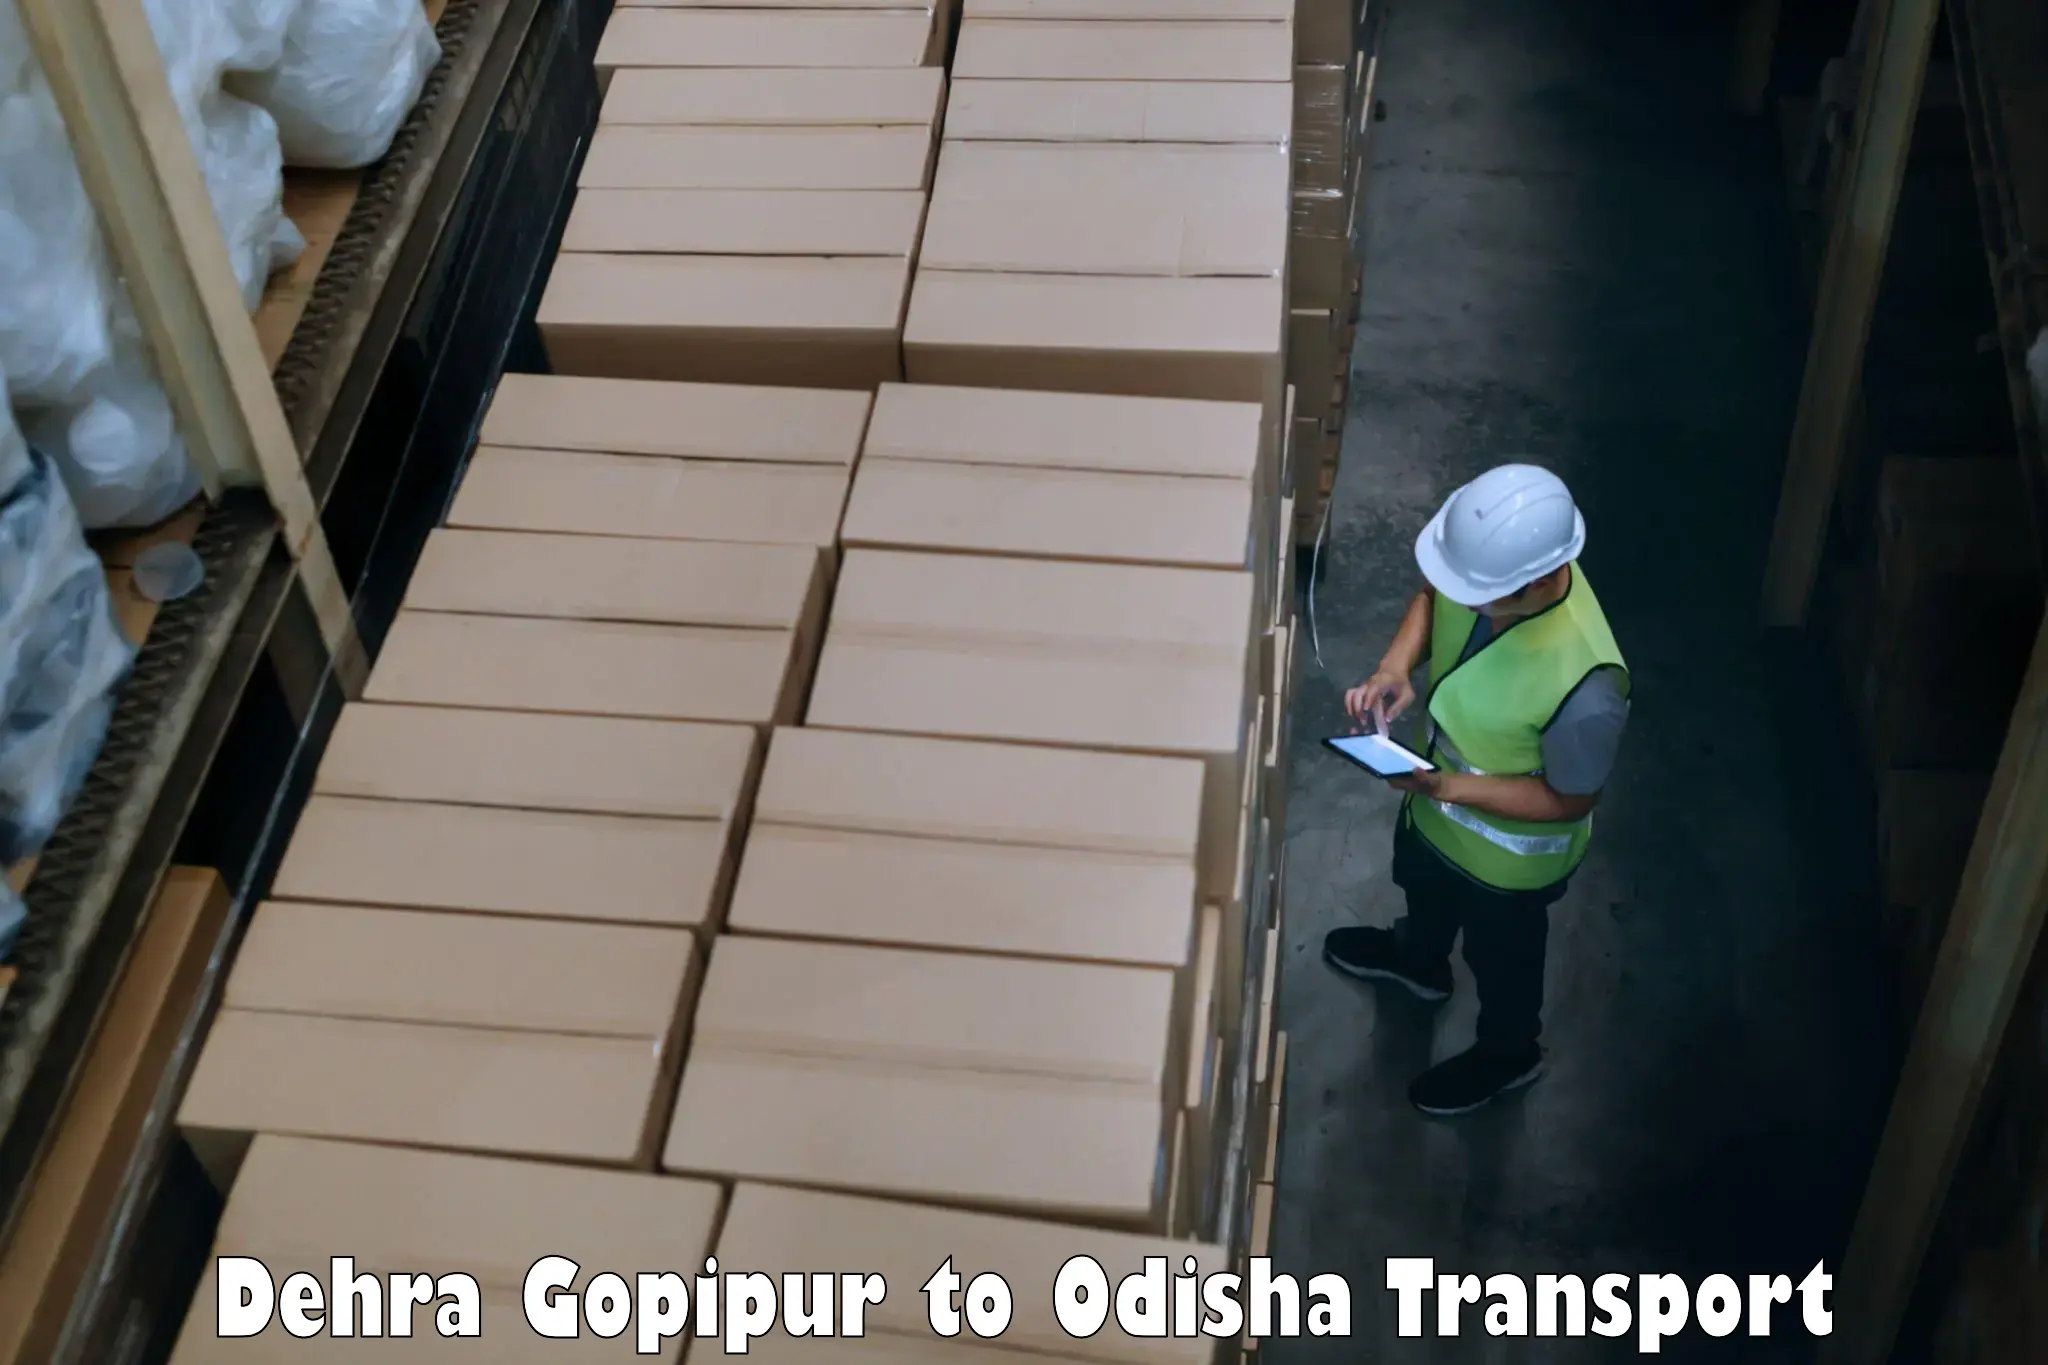 Transport shared services Dehra Gopipur to Mayurbhanj